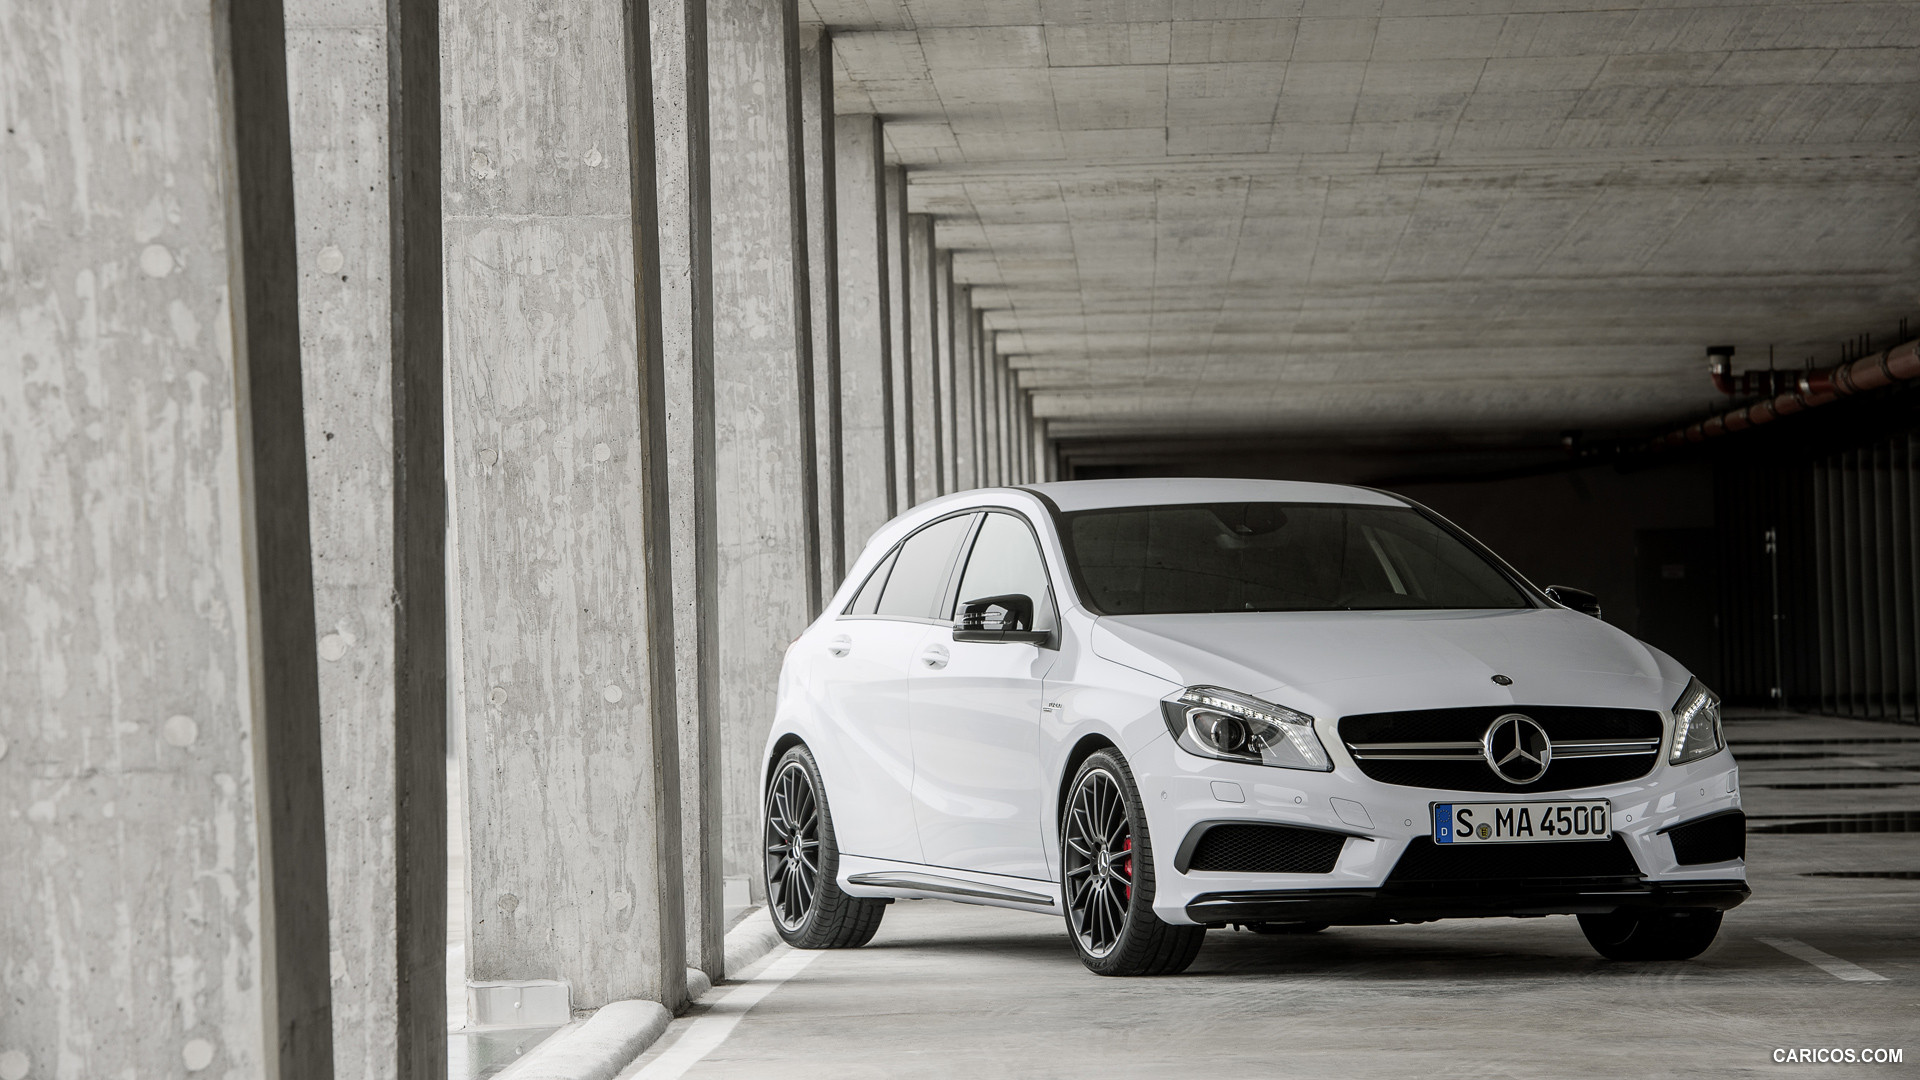 2014 Mercedes-Benz A 45 AMG  - Front, #1 of 16